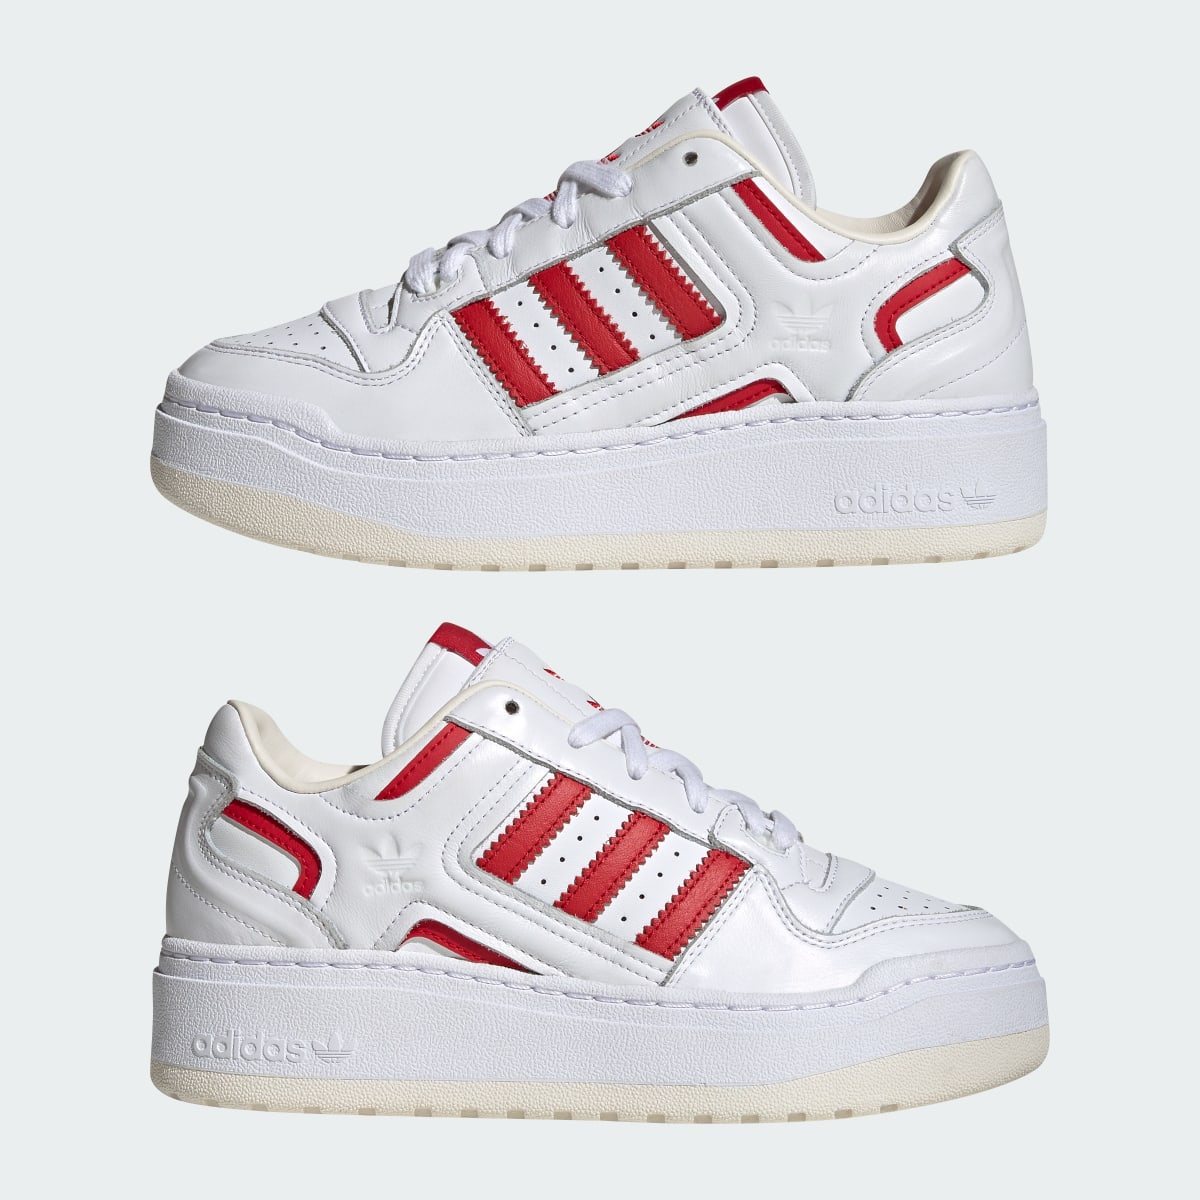 Adidas Chaussure Forum XLG. 8